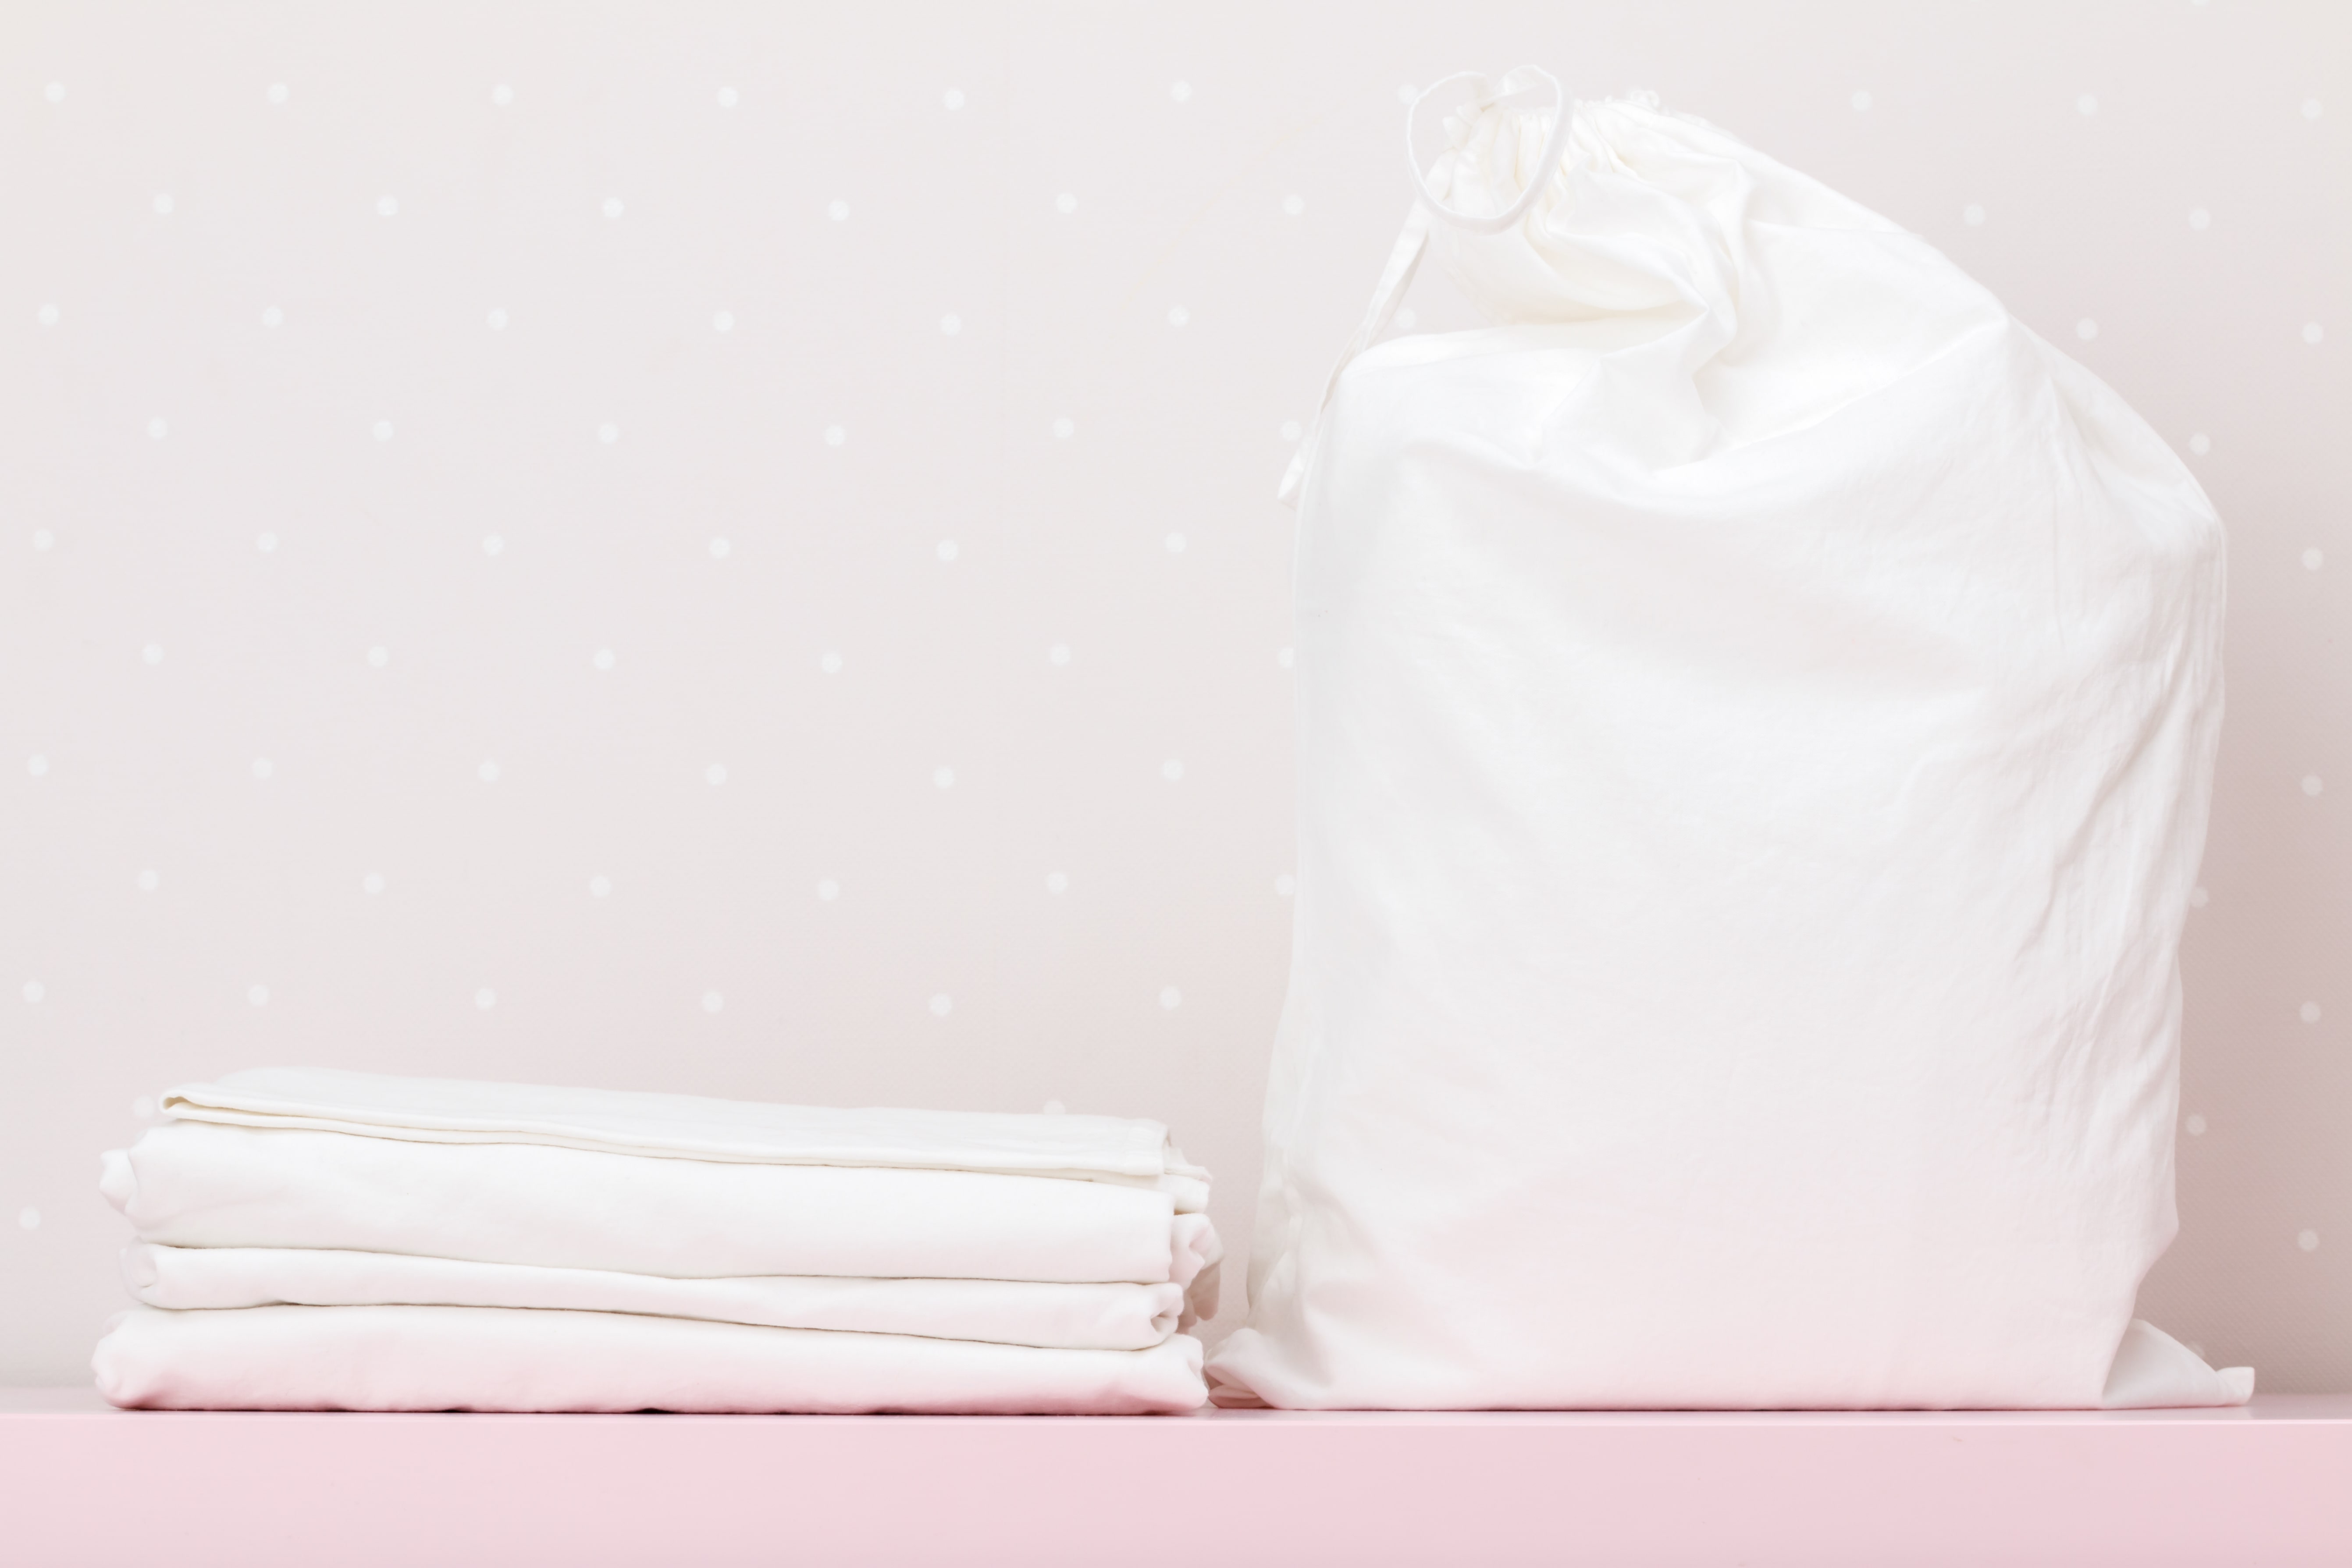 A duvet stored in a breathable bag. Some bedsheets are piled neatly next to the duvet bag.